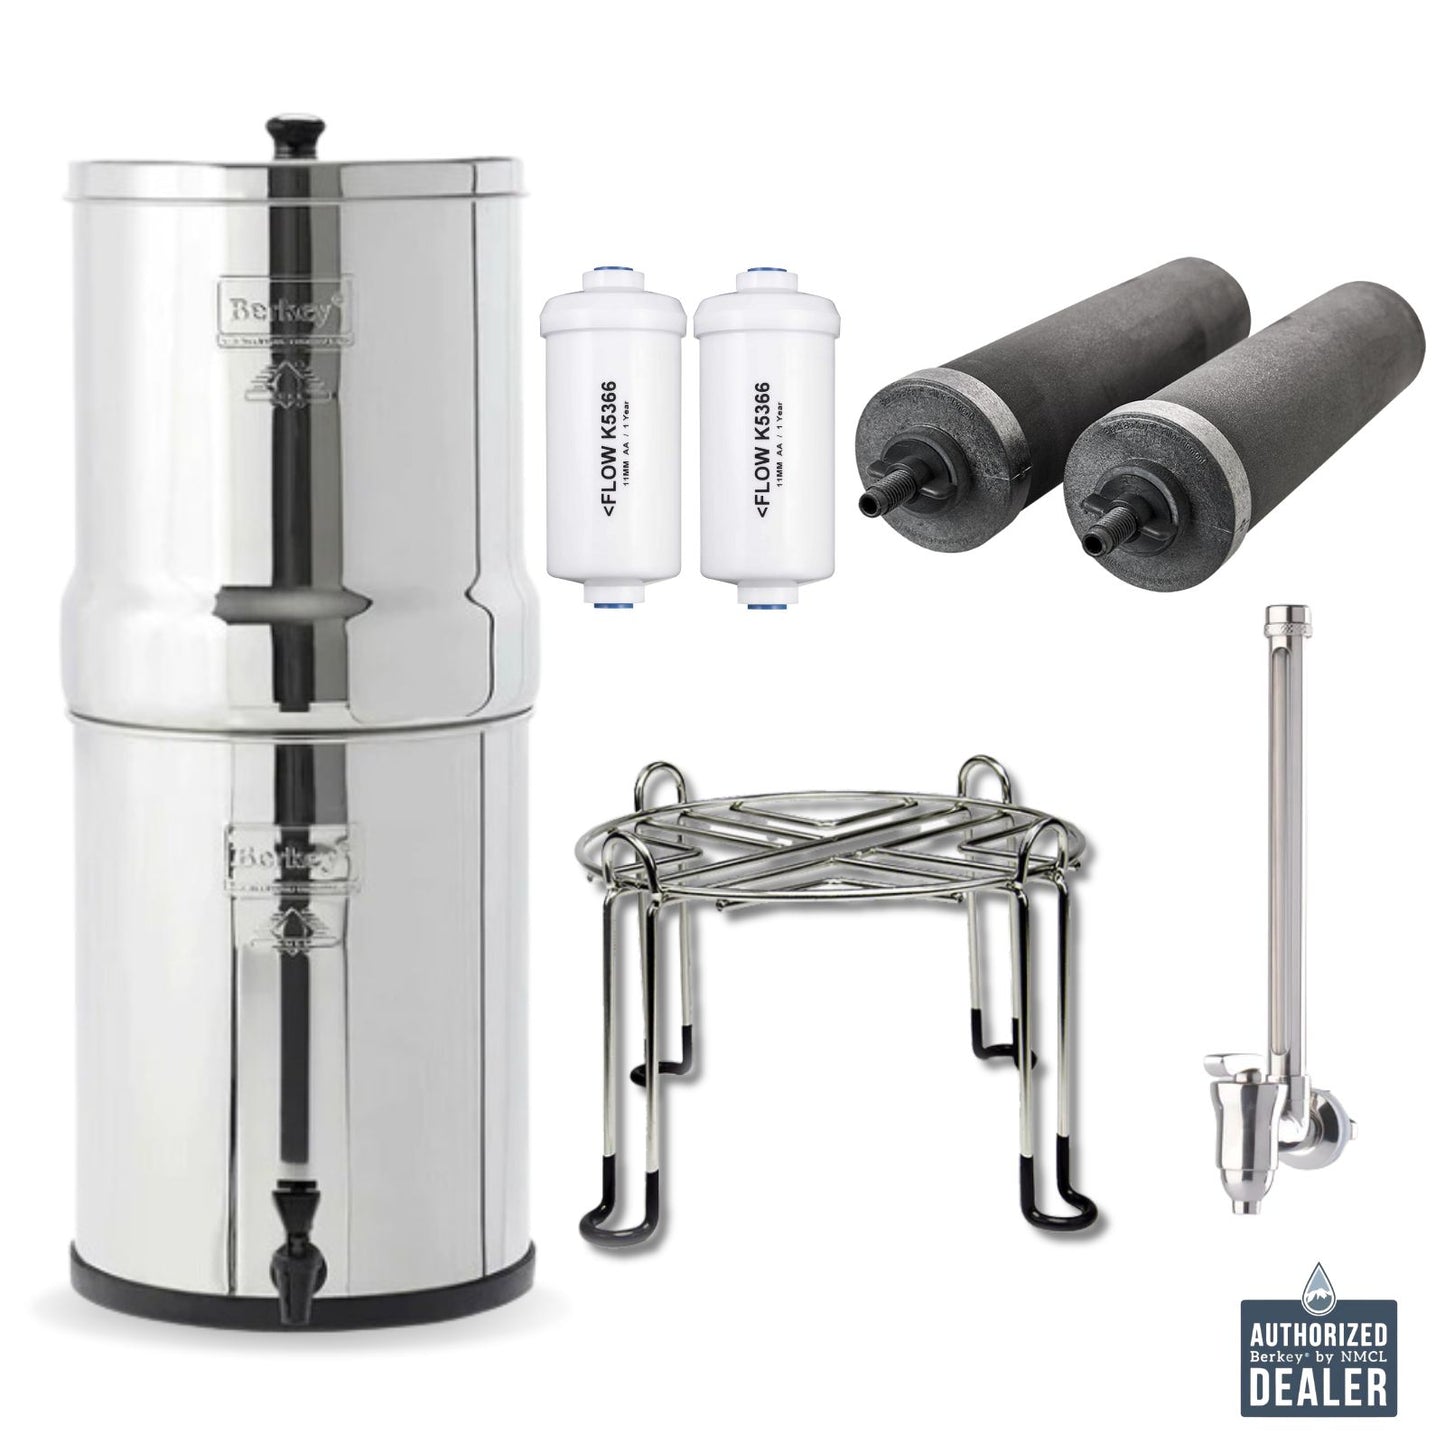 Royal  Berkey with Black Berkey Elements, PF2 Fluoride Filters, Stainless Stand and View Spigot - Bundle